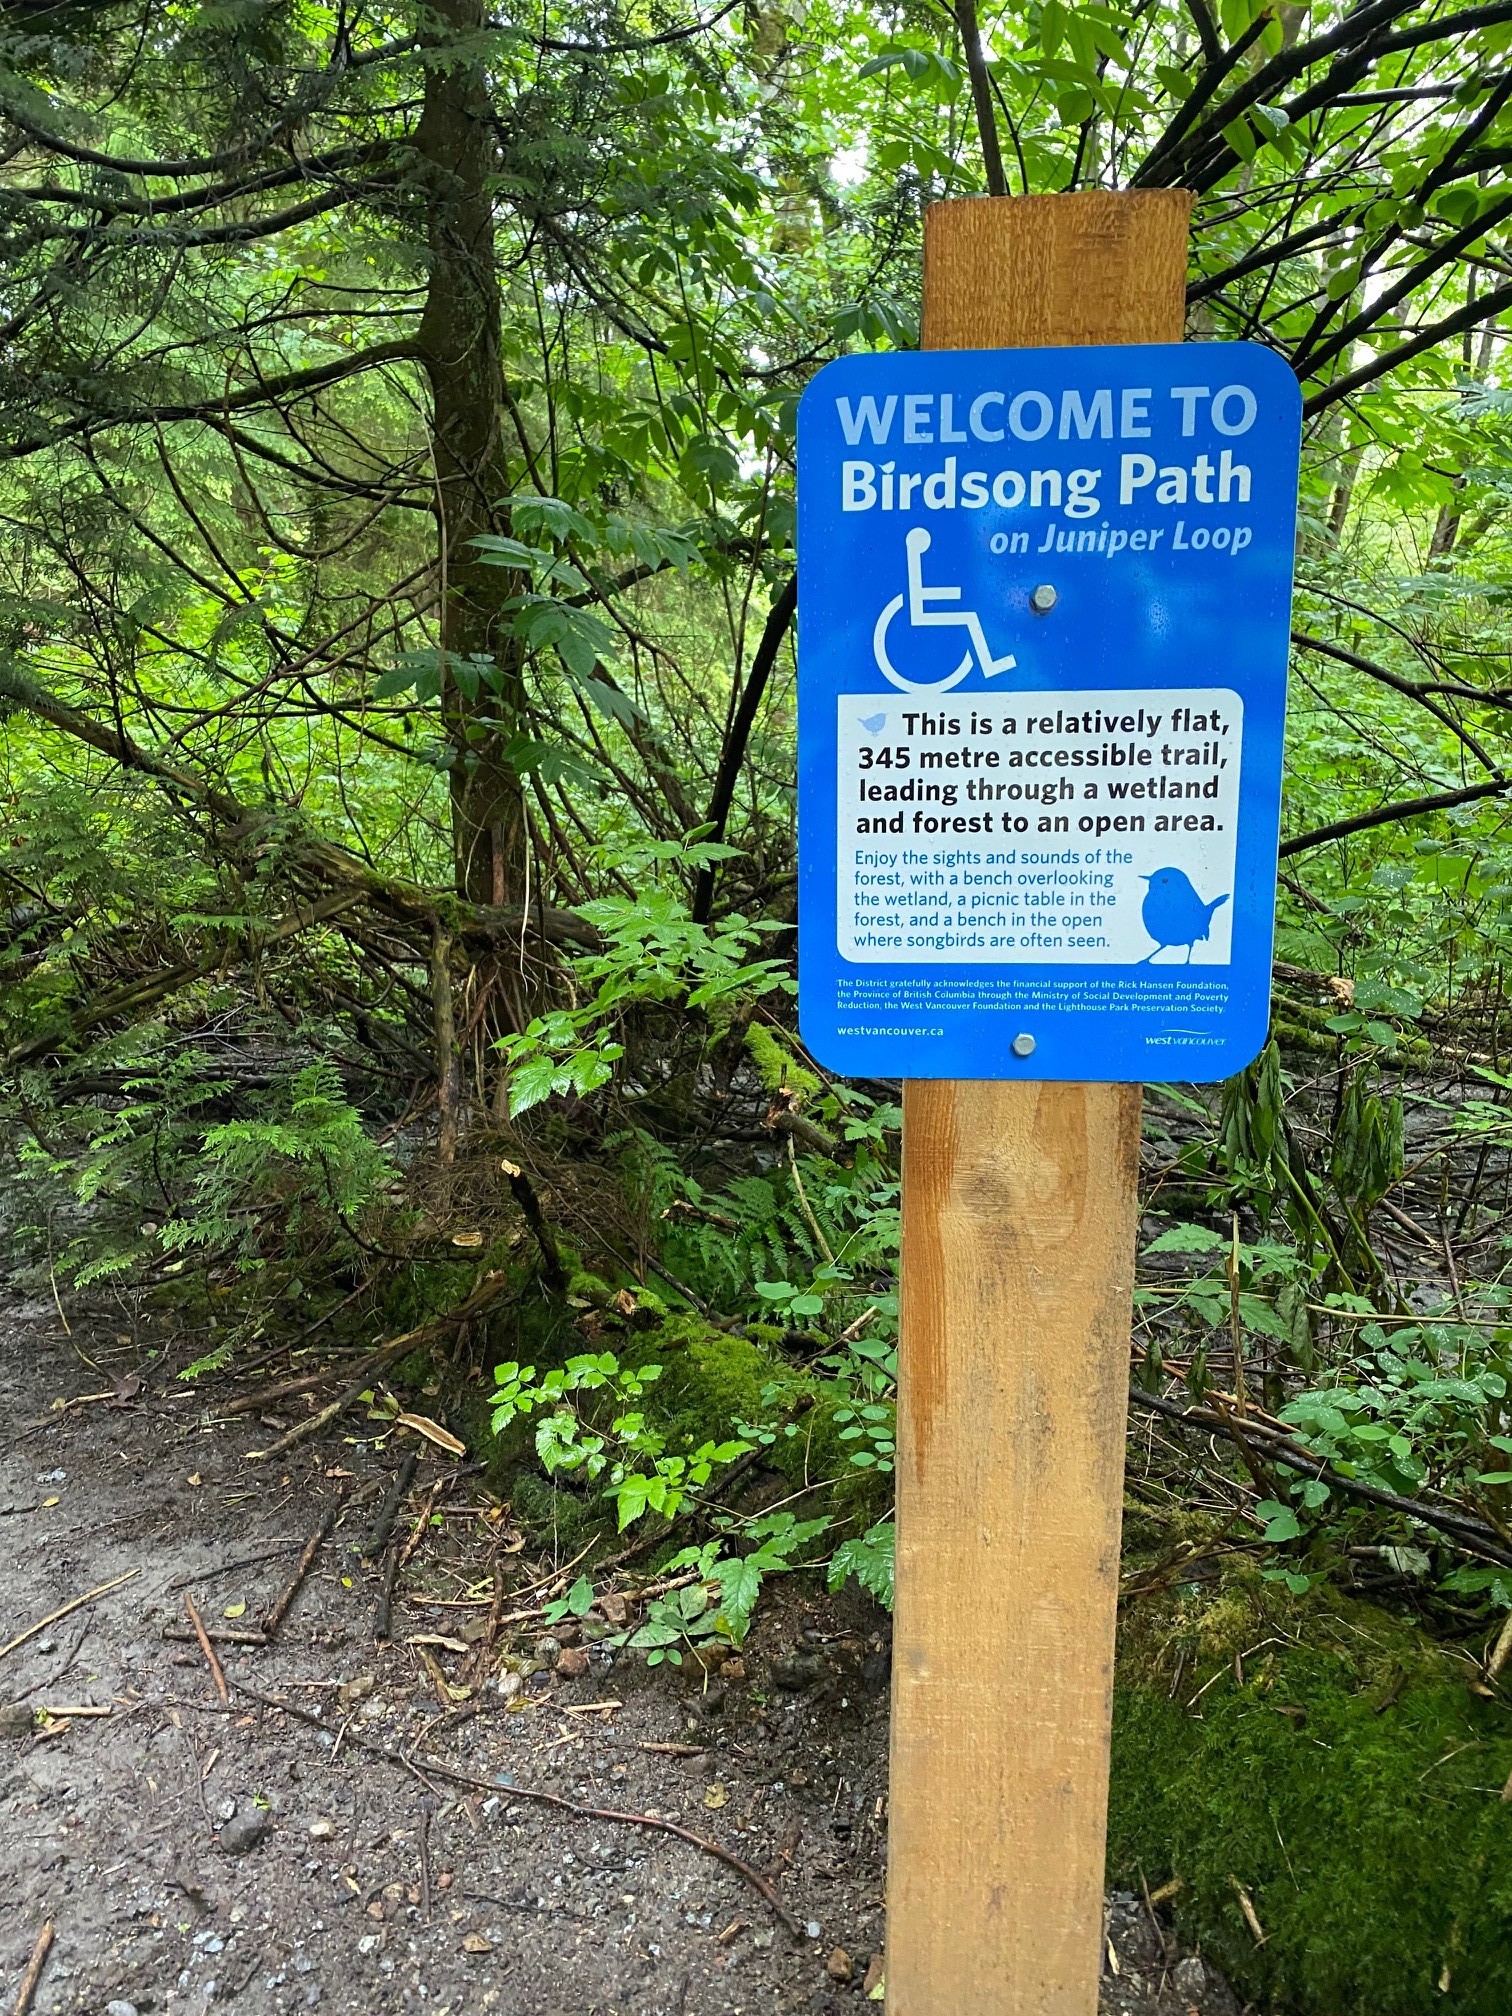 A blue sign in a rainforest park. It reads "Welcome to Birdsong Path on Juniper Loop. This is a relatively flat, 345 metre accessible trail, leading through a wetland and forest to an open area. Enjoy the sights and sounds of the forest, with a bench overlooking the wetland, a picnic table in the forest, and a bench in the open where songbirds are often seen." 